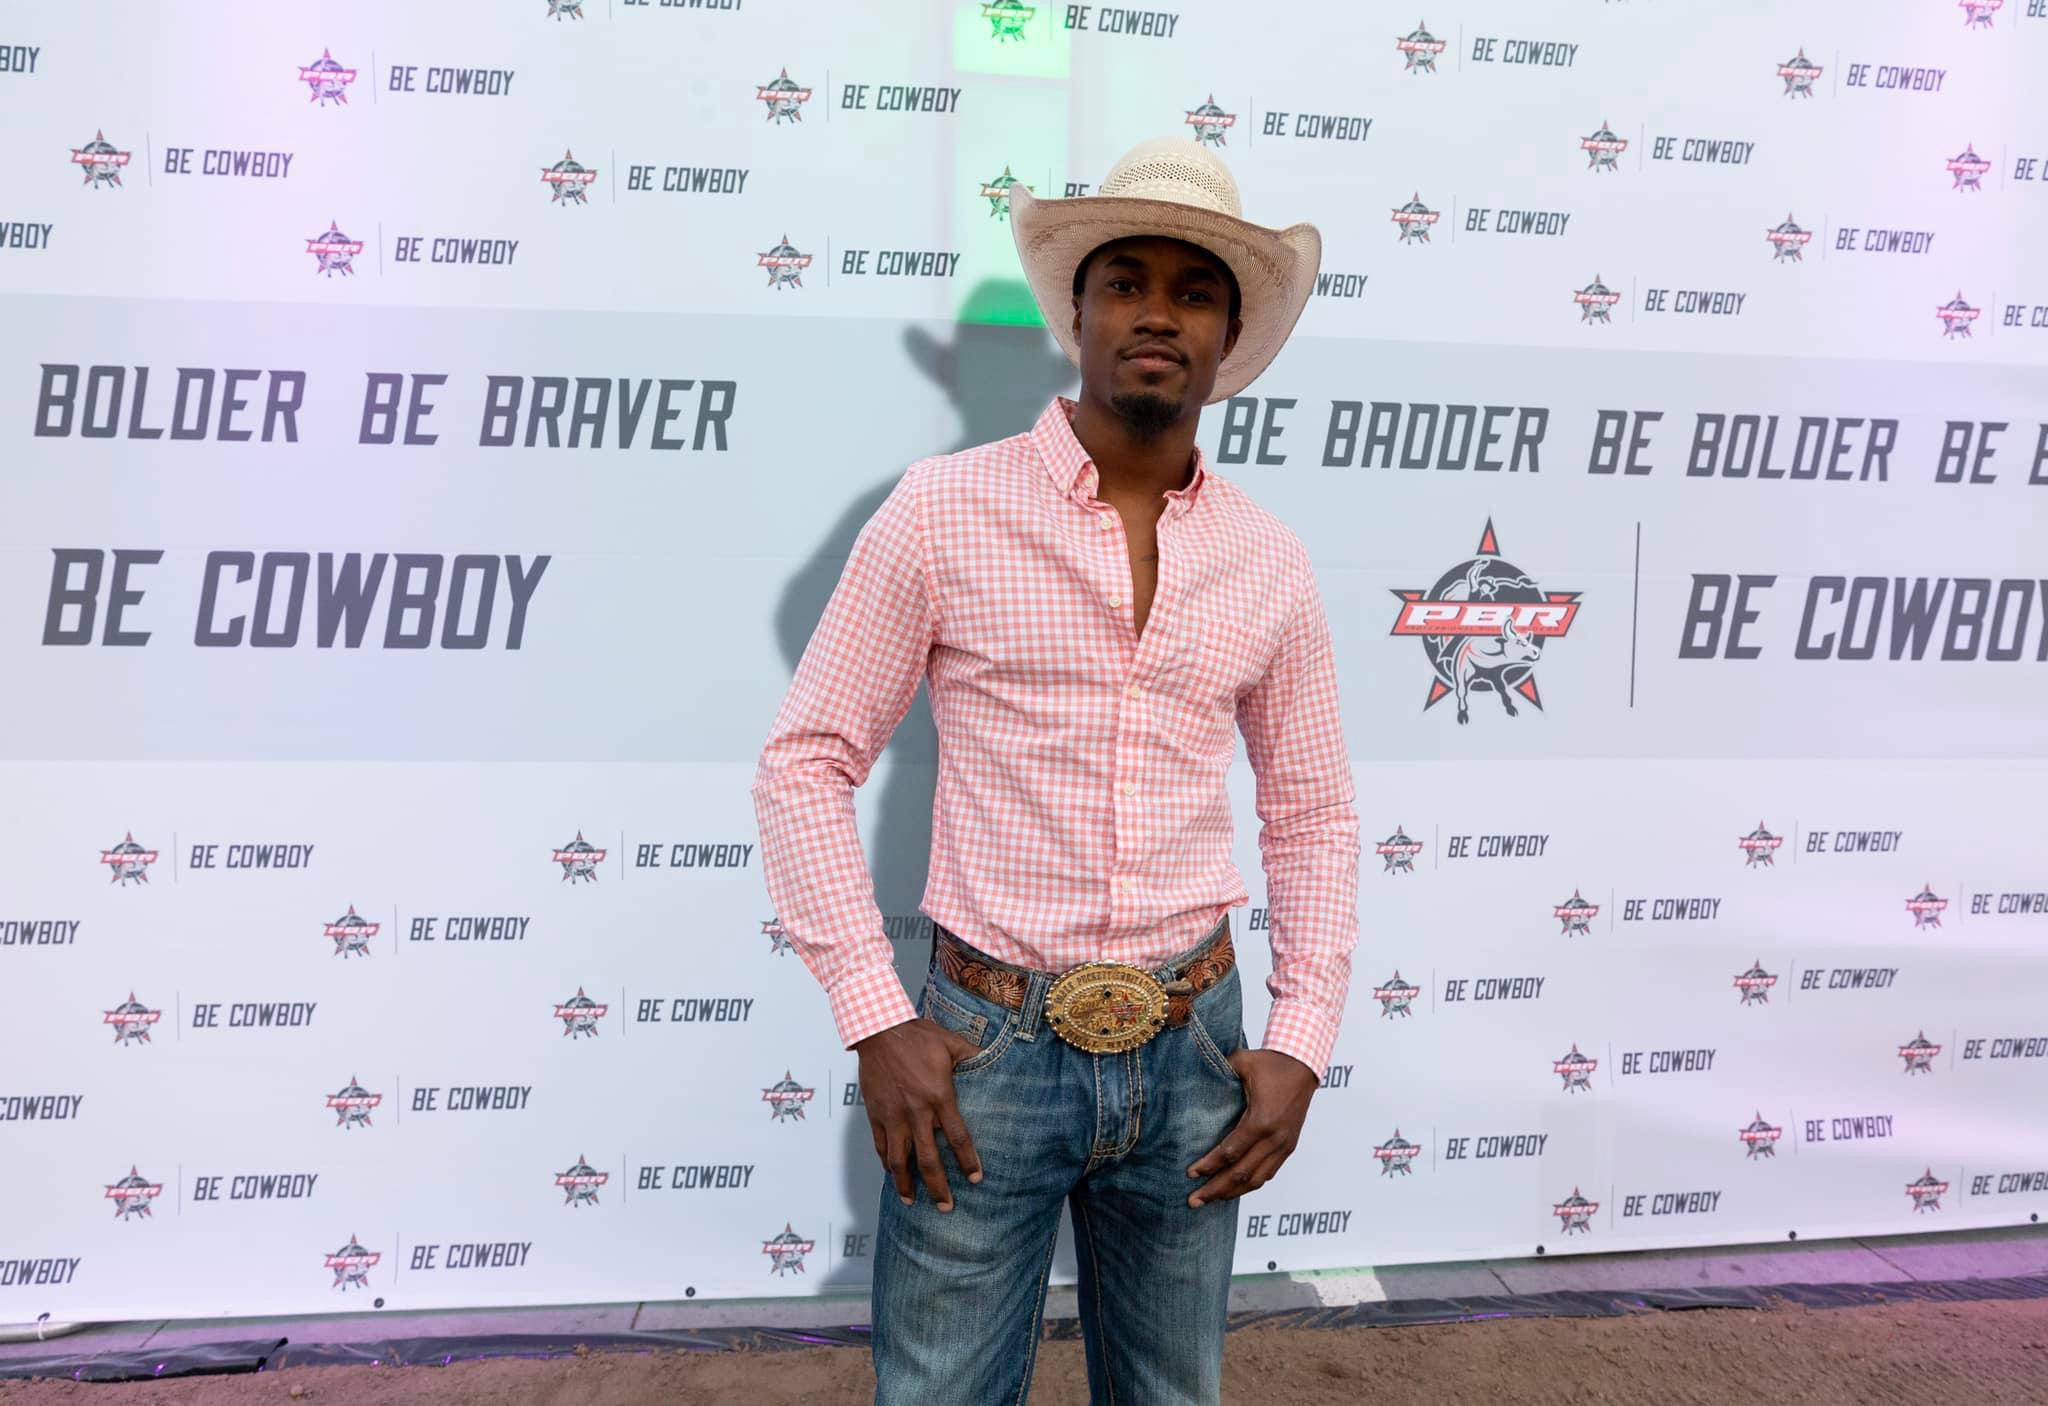 Allen is seen in rodeo gear with a professional backdrop...